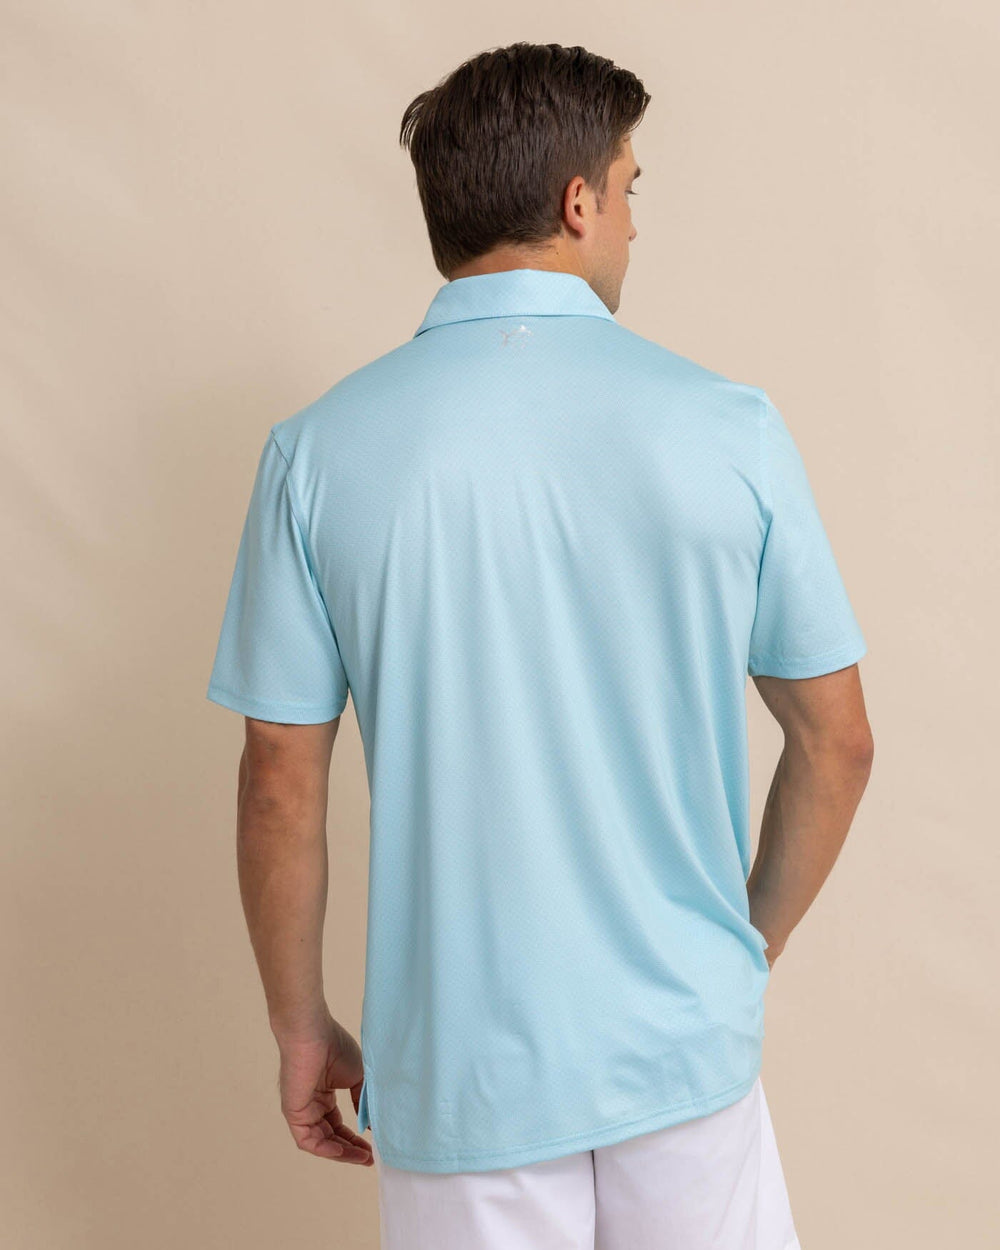 The back view of the Southern Tide Driver Coastal Geo Polo Shirt by Southern Tide - Chilled Blue